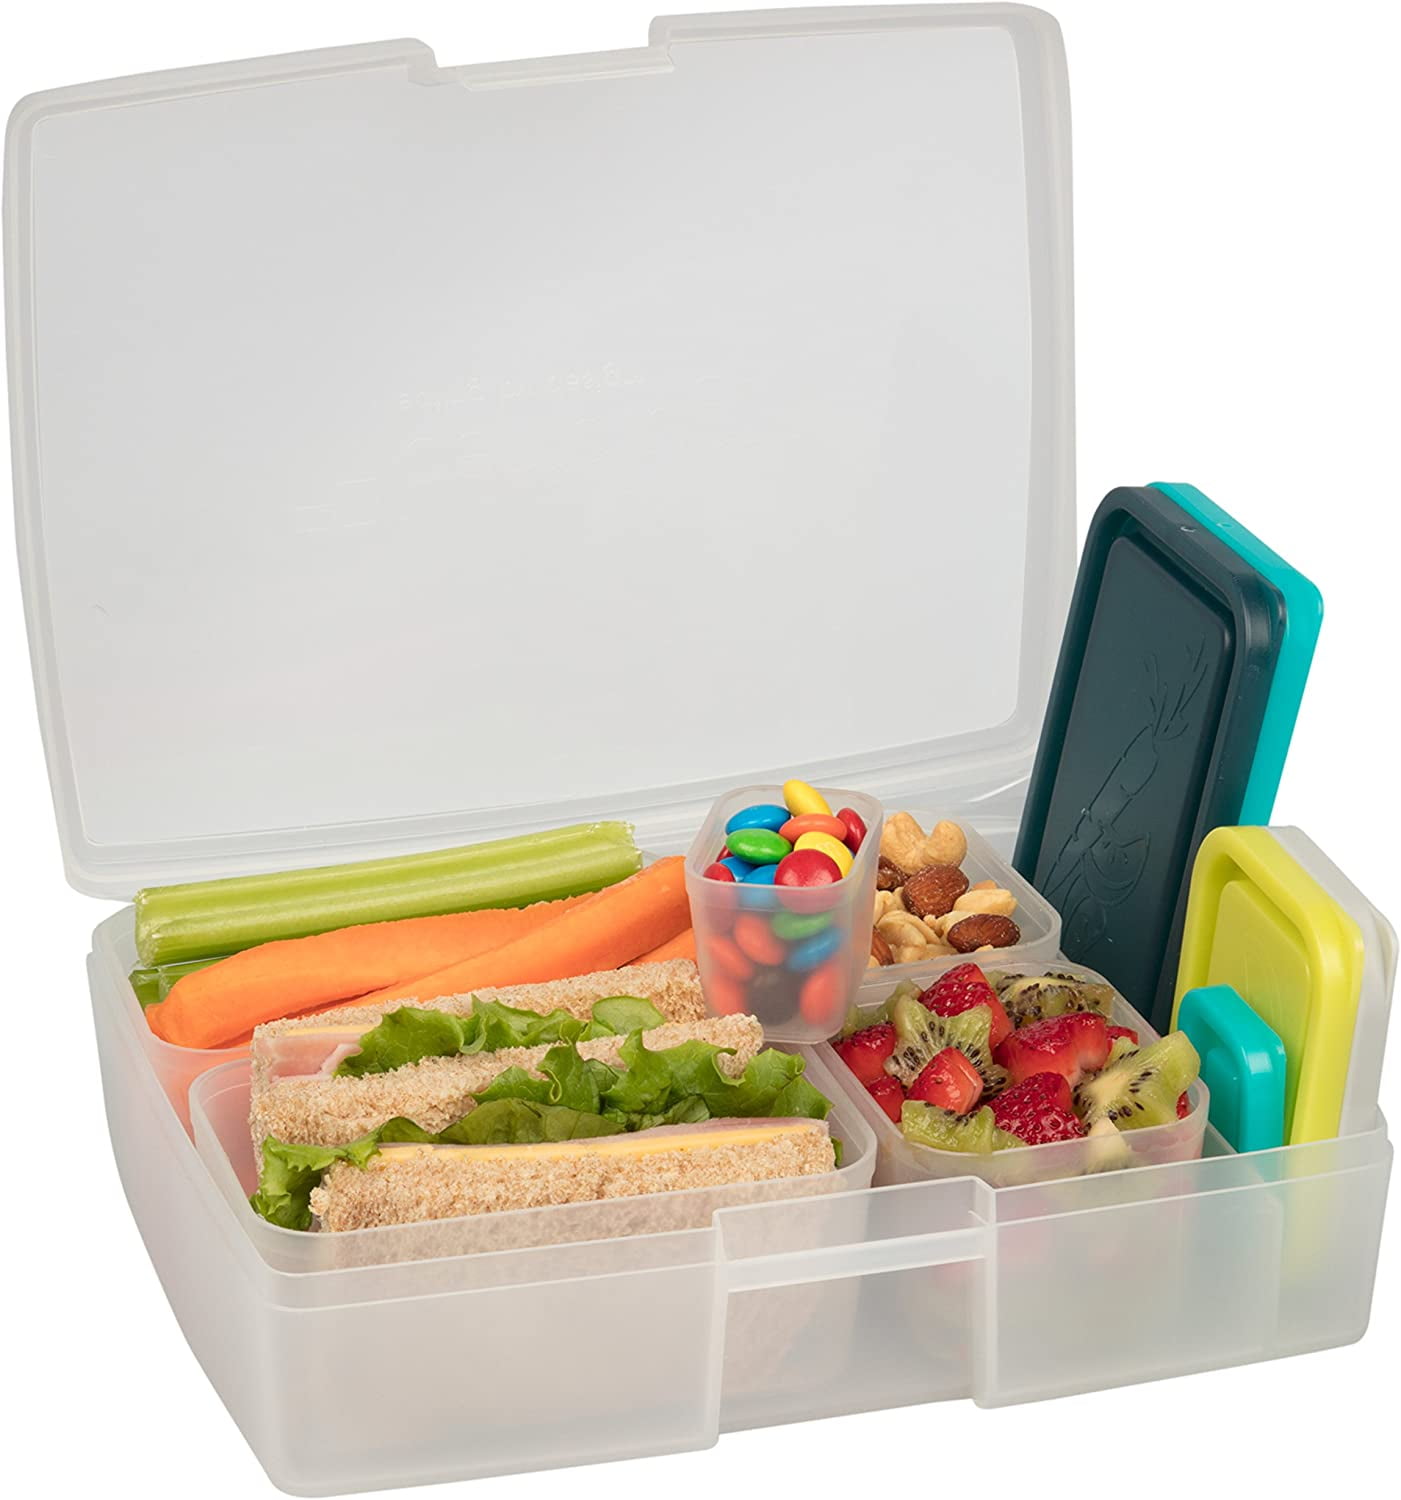 ermete® Leak-Proof 4-compartment Bento Lunch Box for Kids with Removable  Divider,Hand-held Lunch Con…See more ermete® Leak-Proof 4-compartment Bento